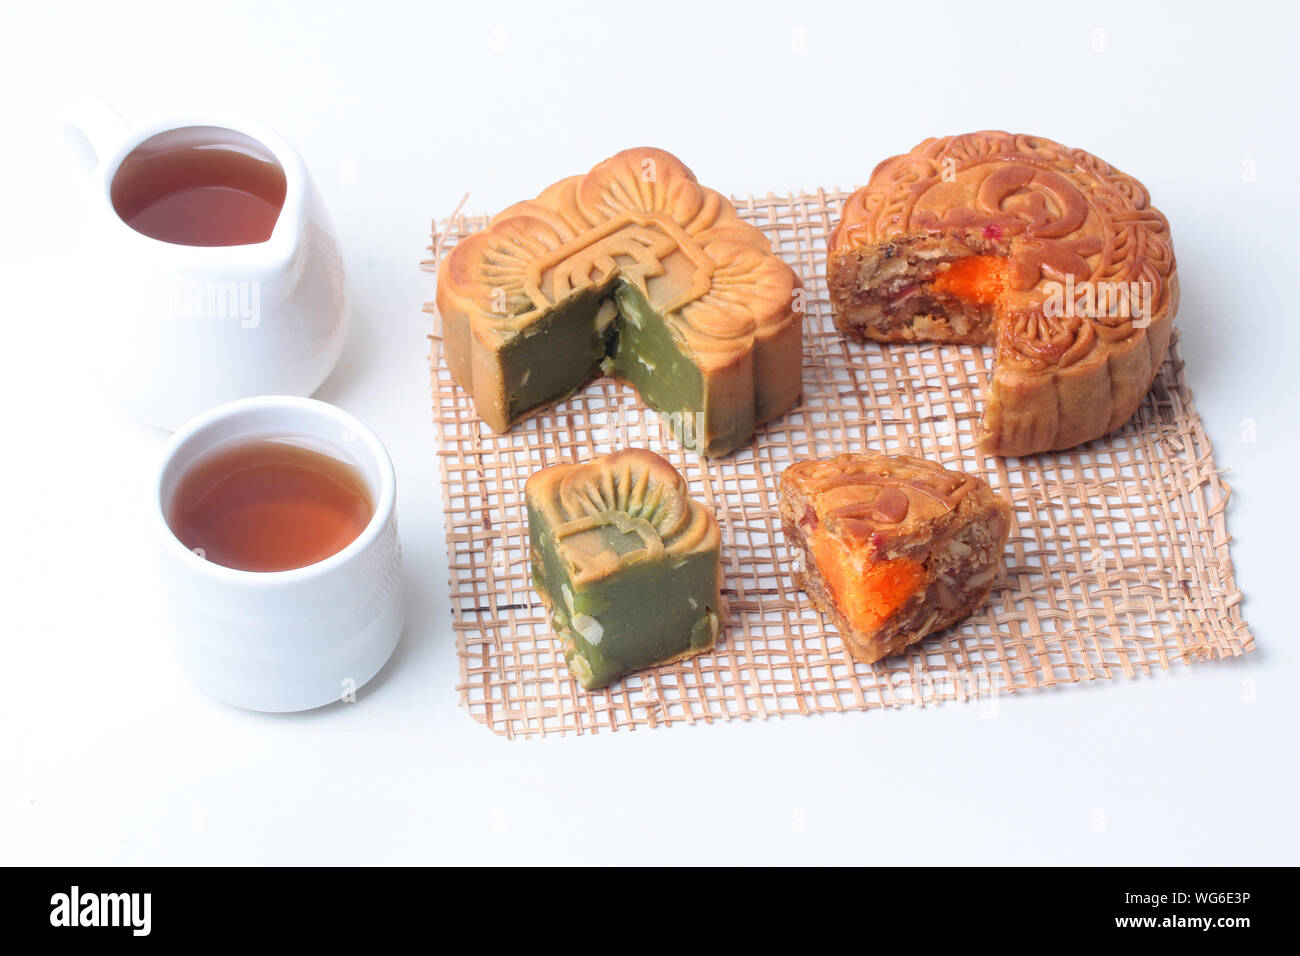 Round mooncake 8 grains and salted eggs and squred shaped moon cakes, red beans, stirred in green tea and chopped macadamia nuts served with tea and t Stock Photo